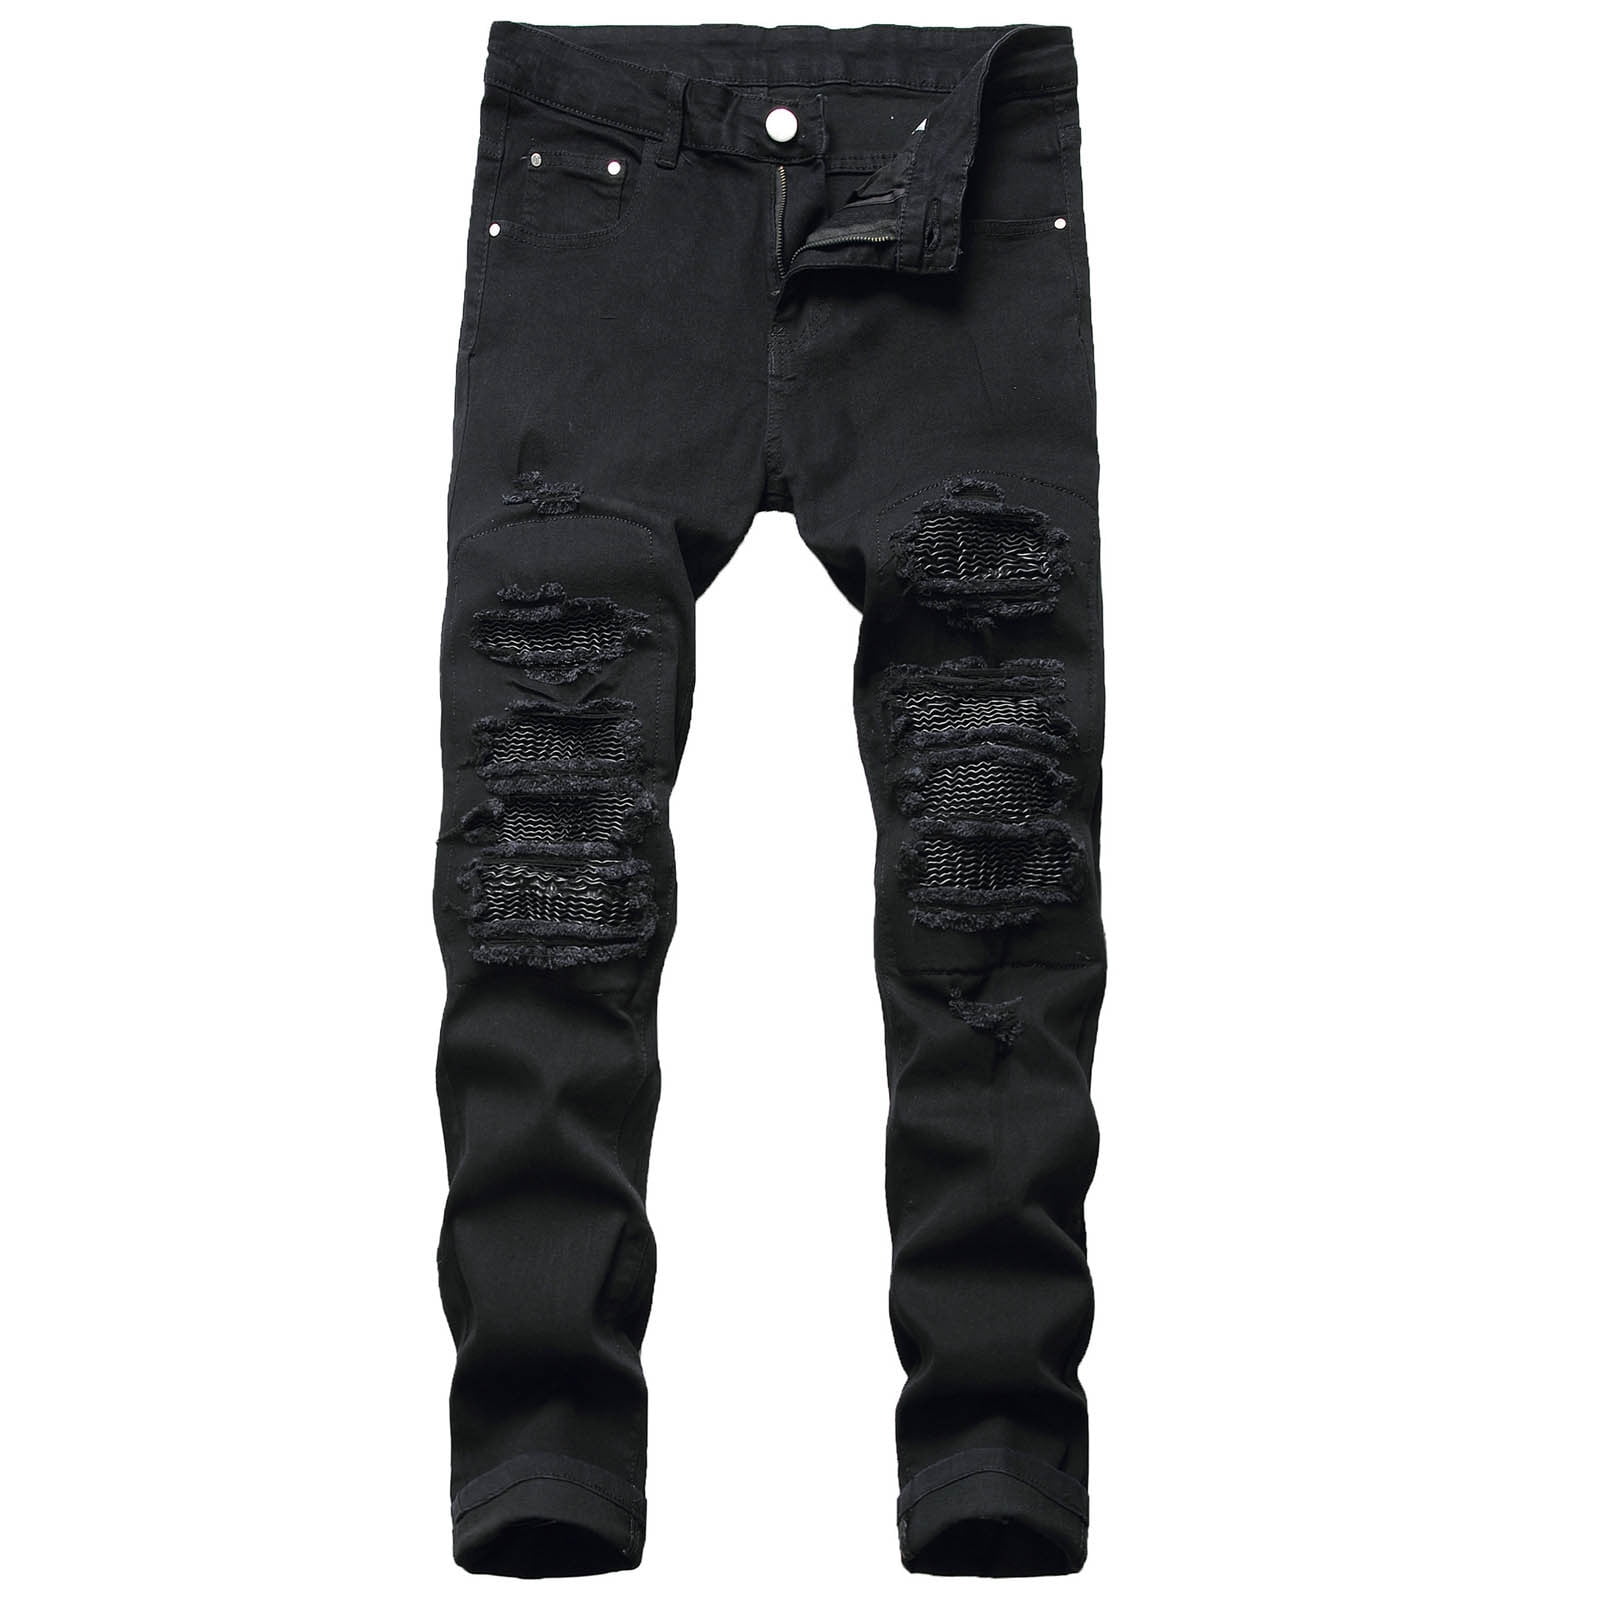 Buy Men Ripped Jeans Distressed Destroyed Holes Contrast Color Side Striped  Hip Hop Streets Pants Huaishu at Amazon.in